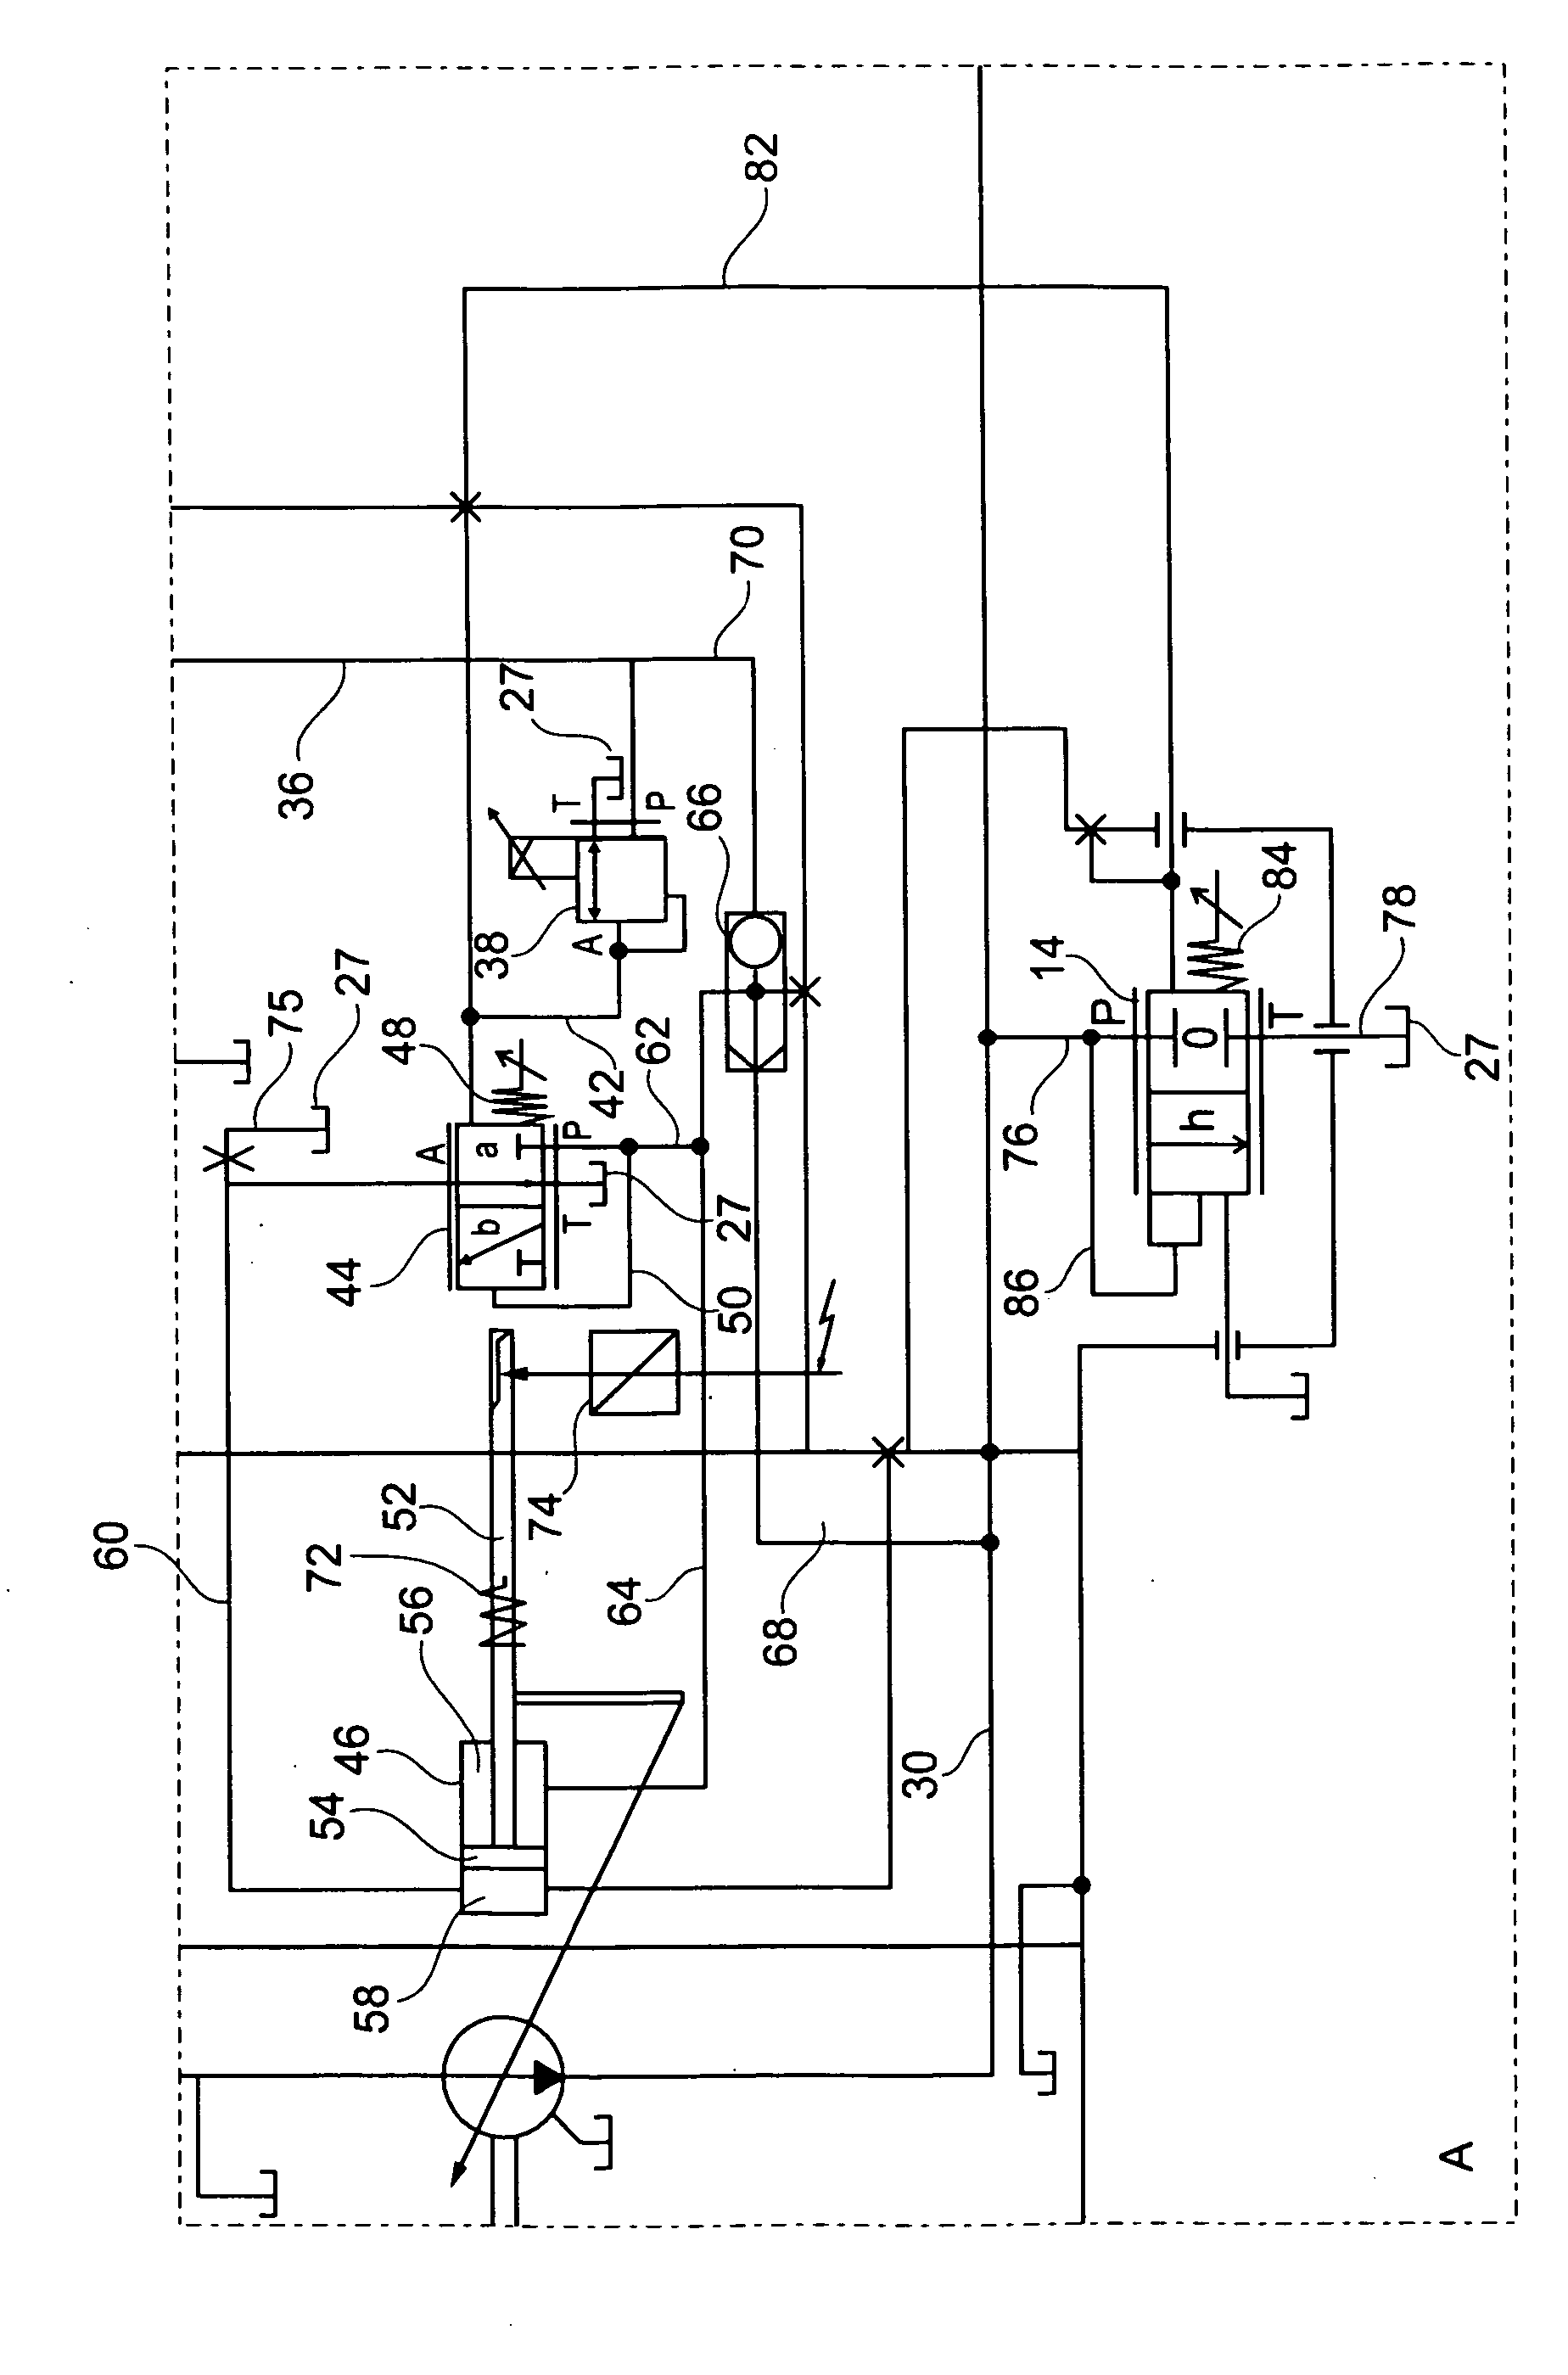 Hydraulic assembly comprising a variable displacement pump and a relief valve